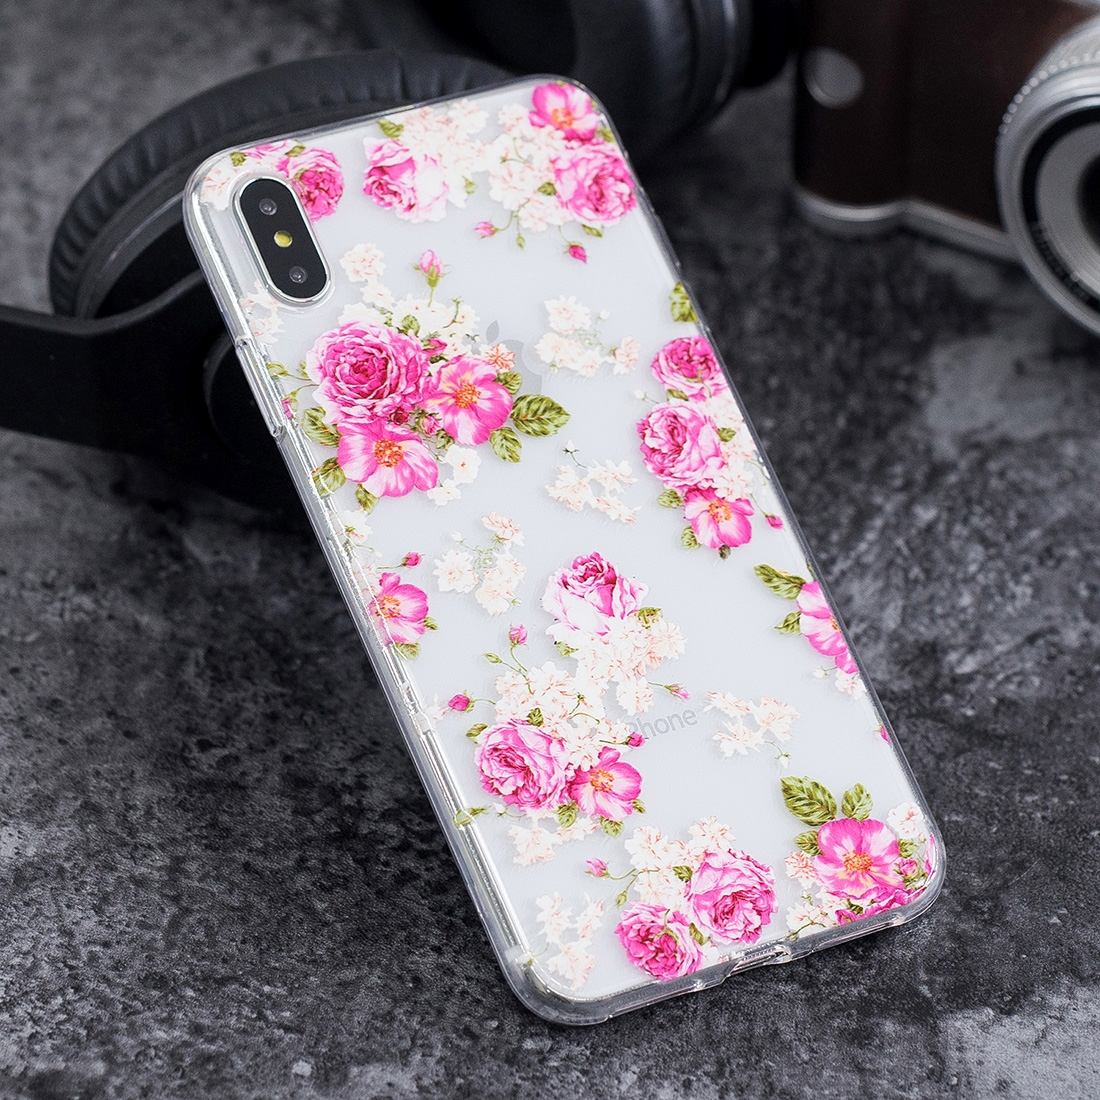 For iPhone XS Max Case,Translucent Soft Slim Protective Phone Cover,Peony Flower